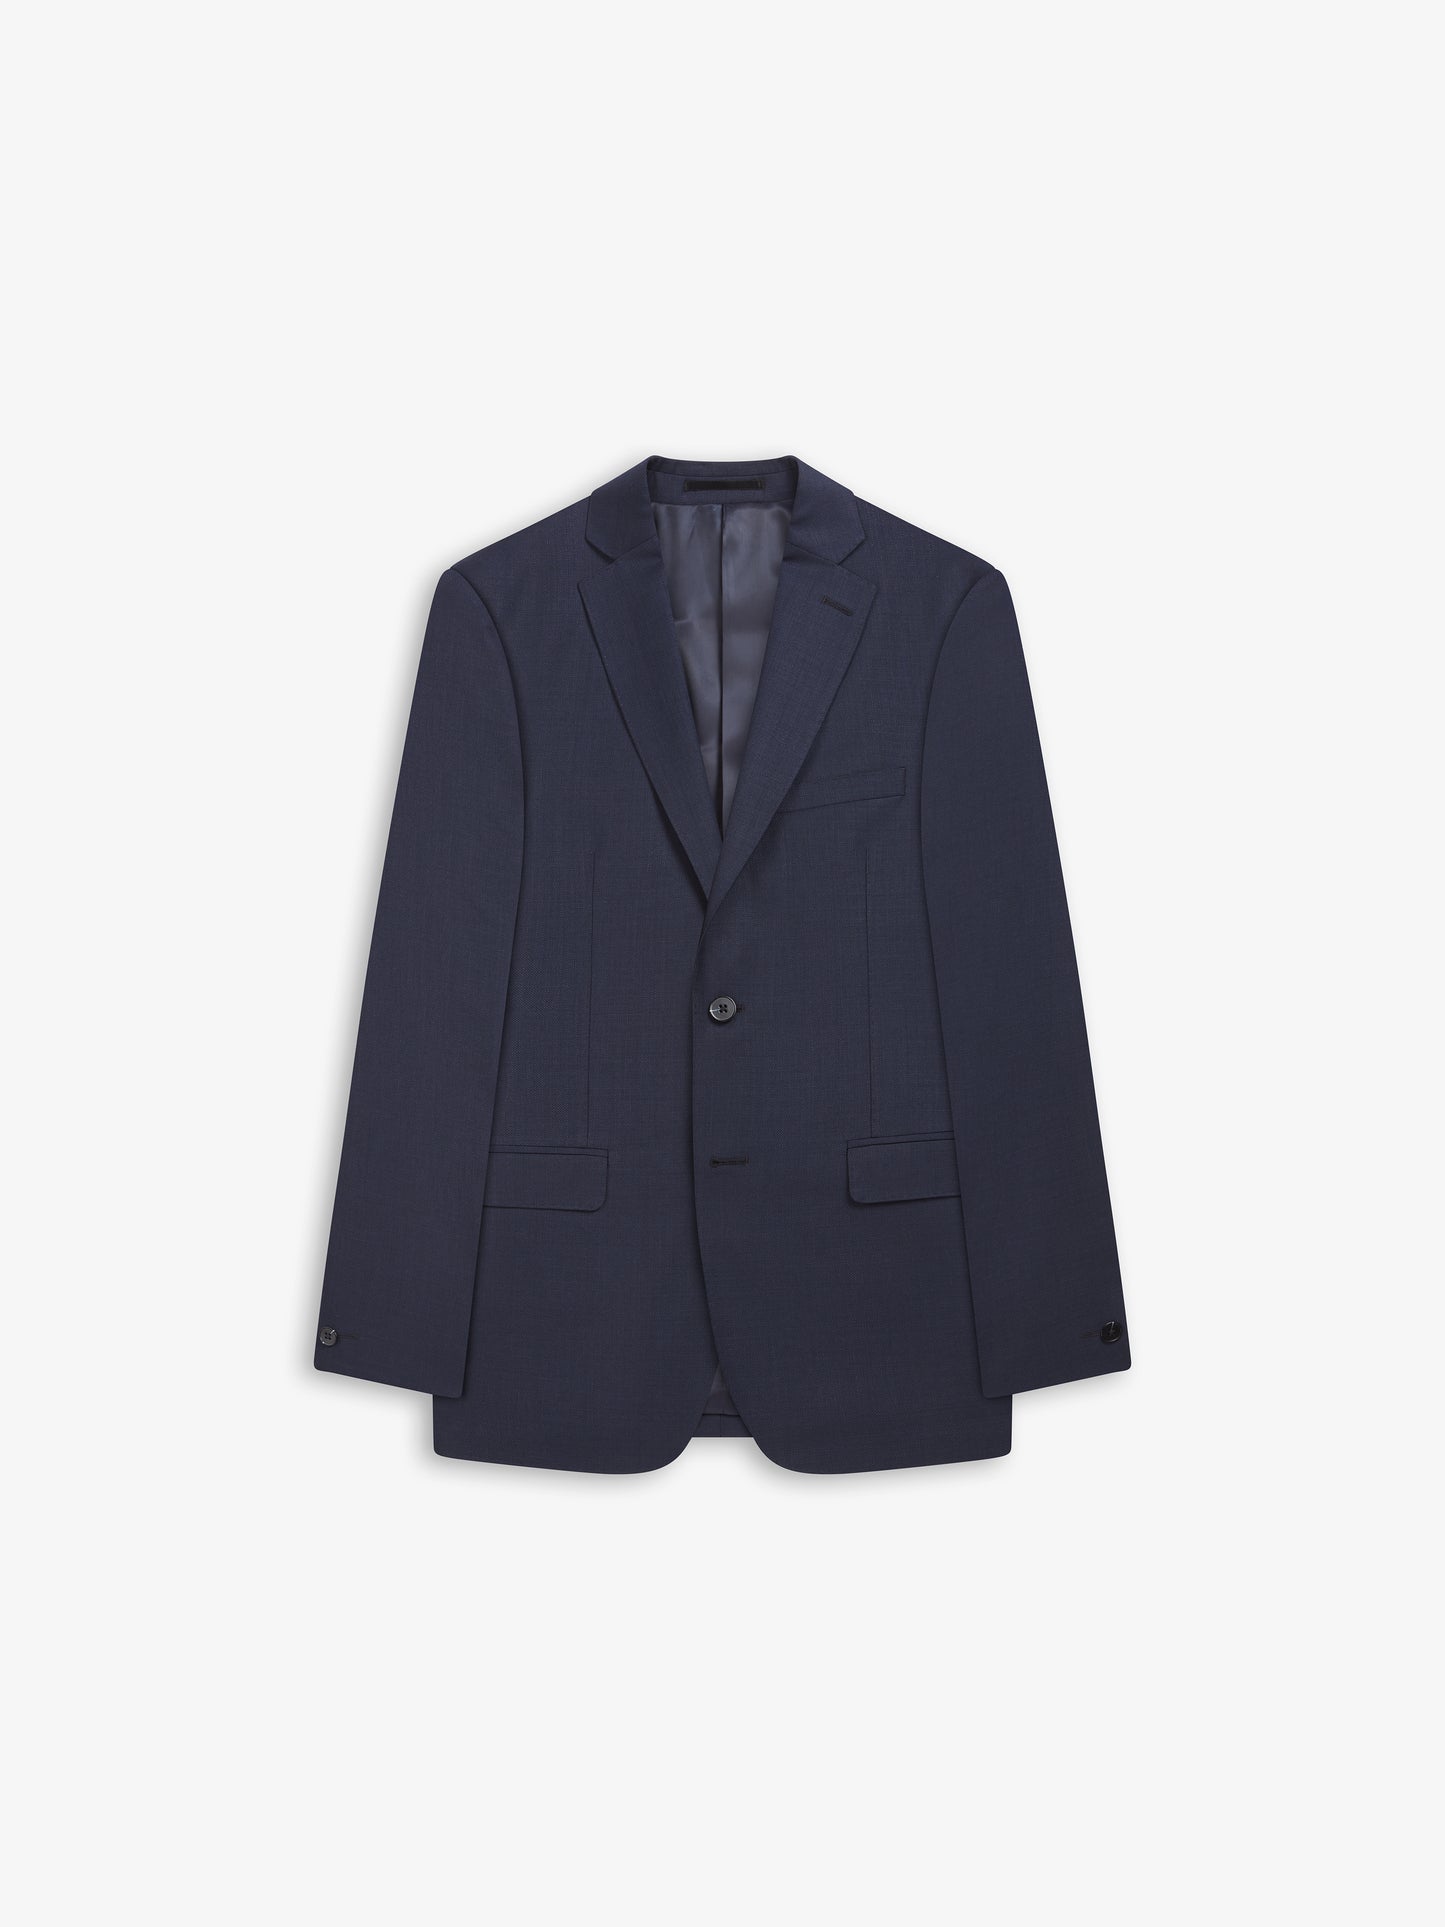 Costello Skinny Fit Navy Textured Jacket